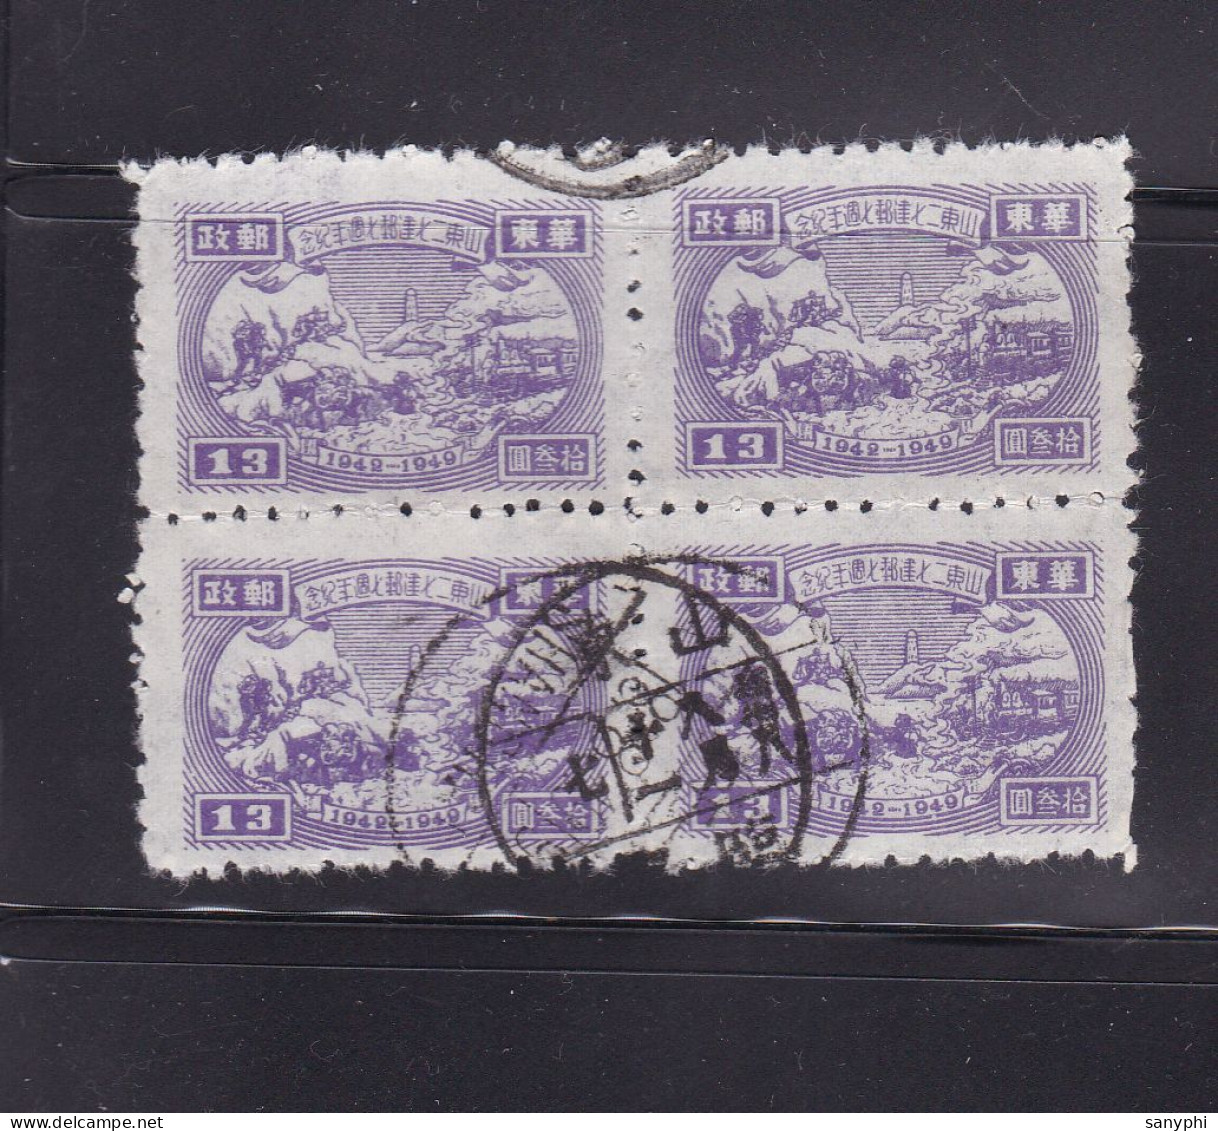 1949 East Cina China Chine SgEC327 4 Used Stamps Cxl By Shangdong  - Ungebraucht